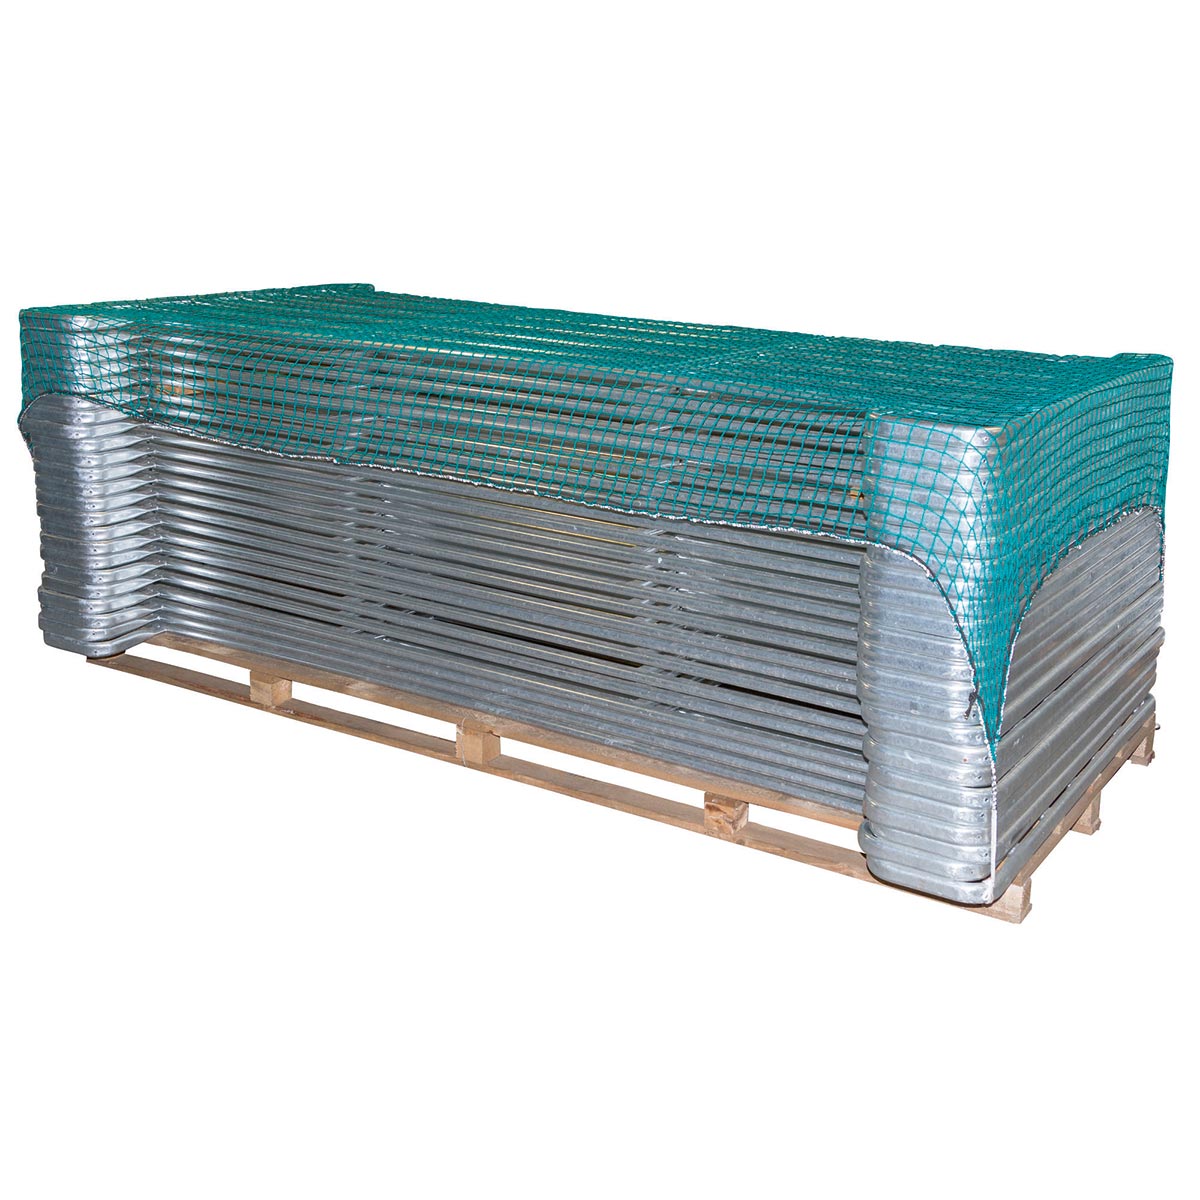 Load protection net SafeNet 3,5 x 2,5 m